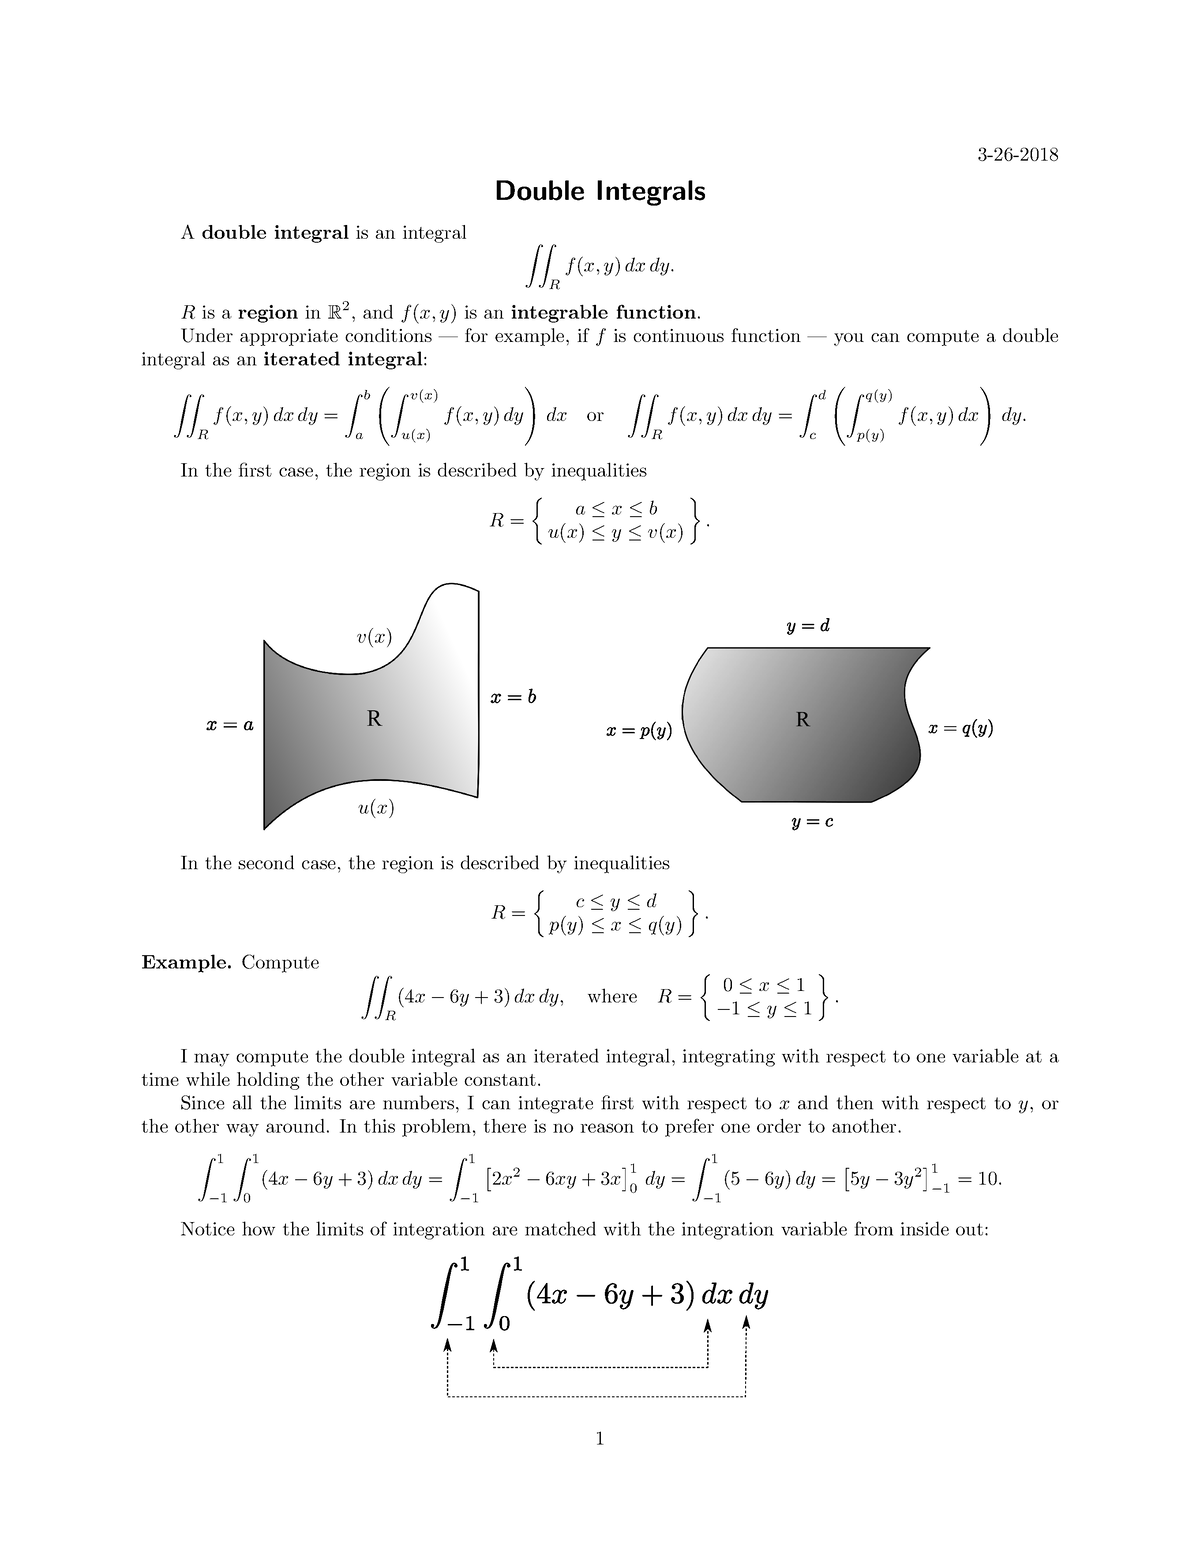 double-integrals-complete-notes-on-double-integrals-3-26-double